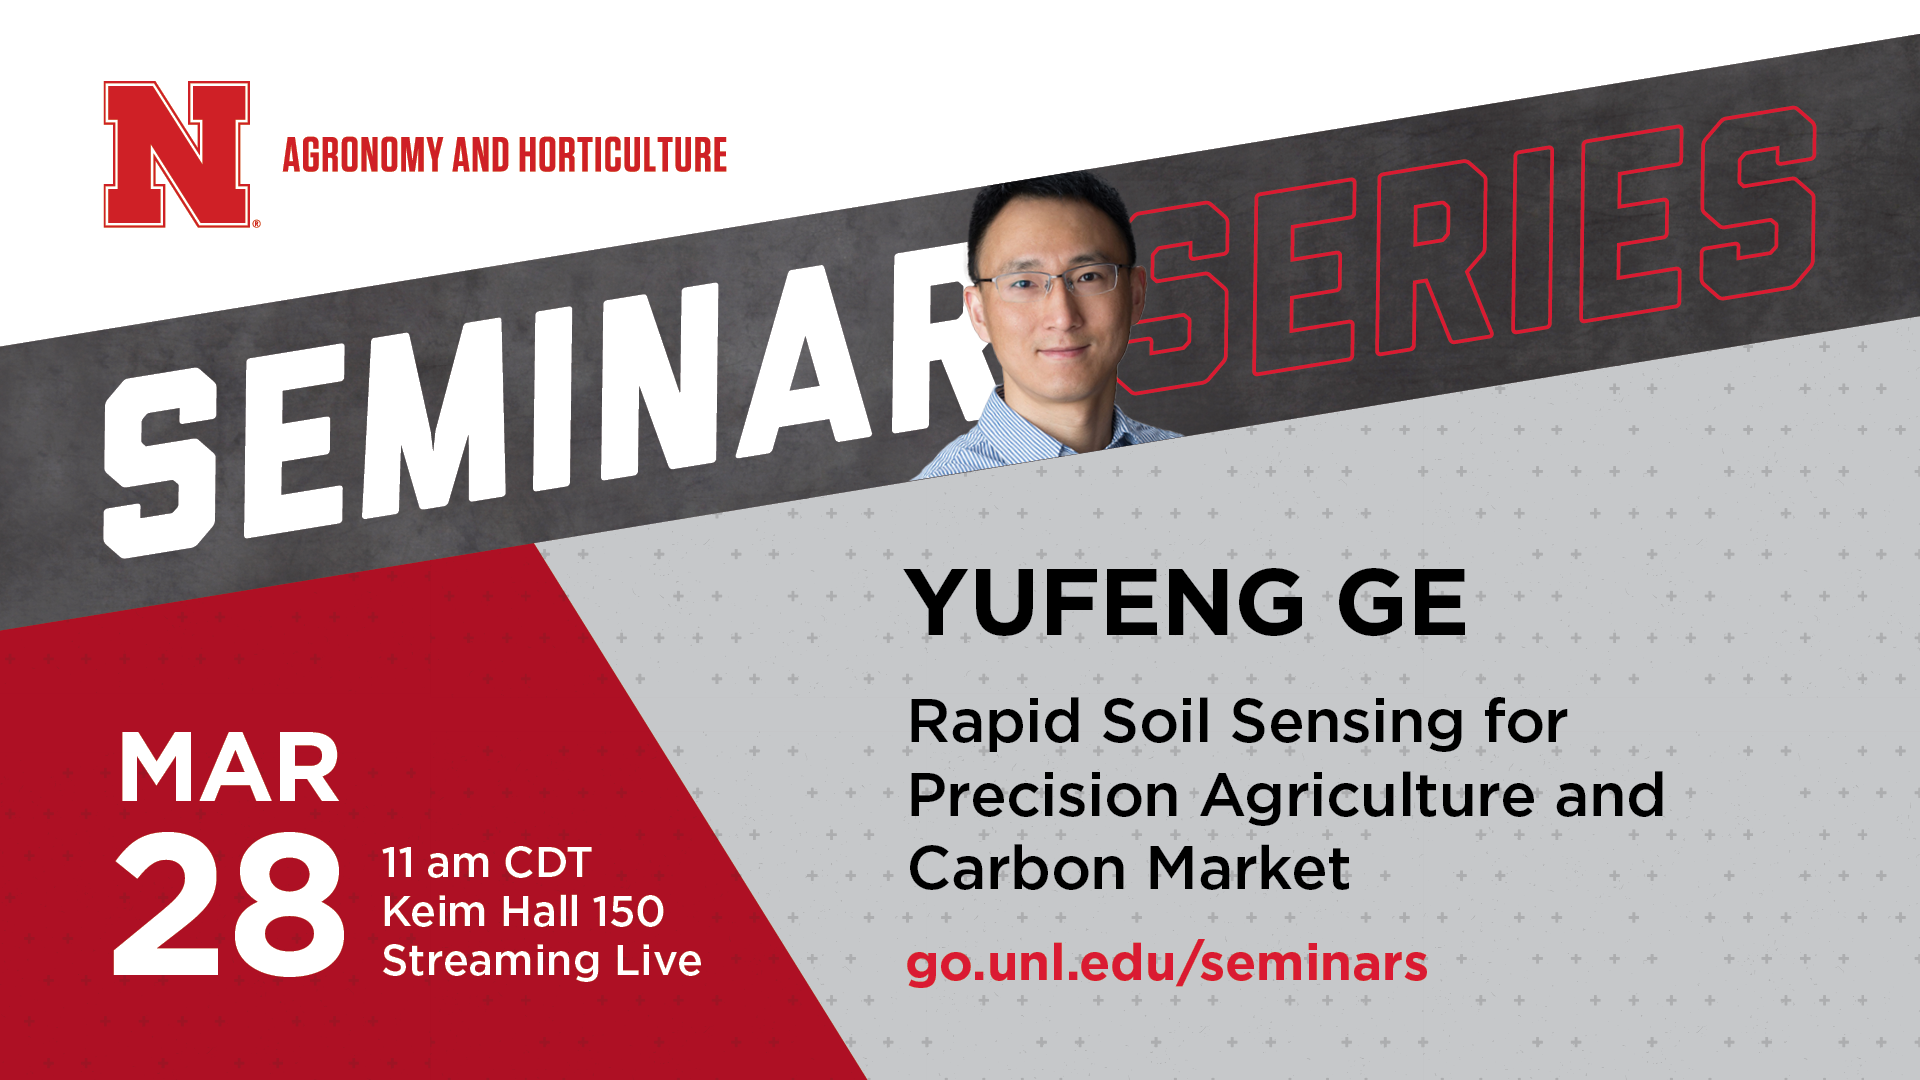 Yufeng Ge, professor in the Department of Biological Systems Engineering, University of Nebraska–Lincoln, will present the next Agronomy and Horticulture seminar on March 28.